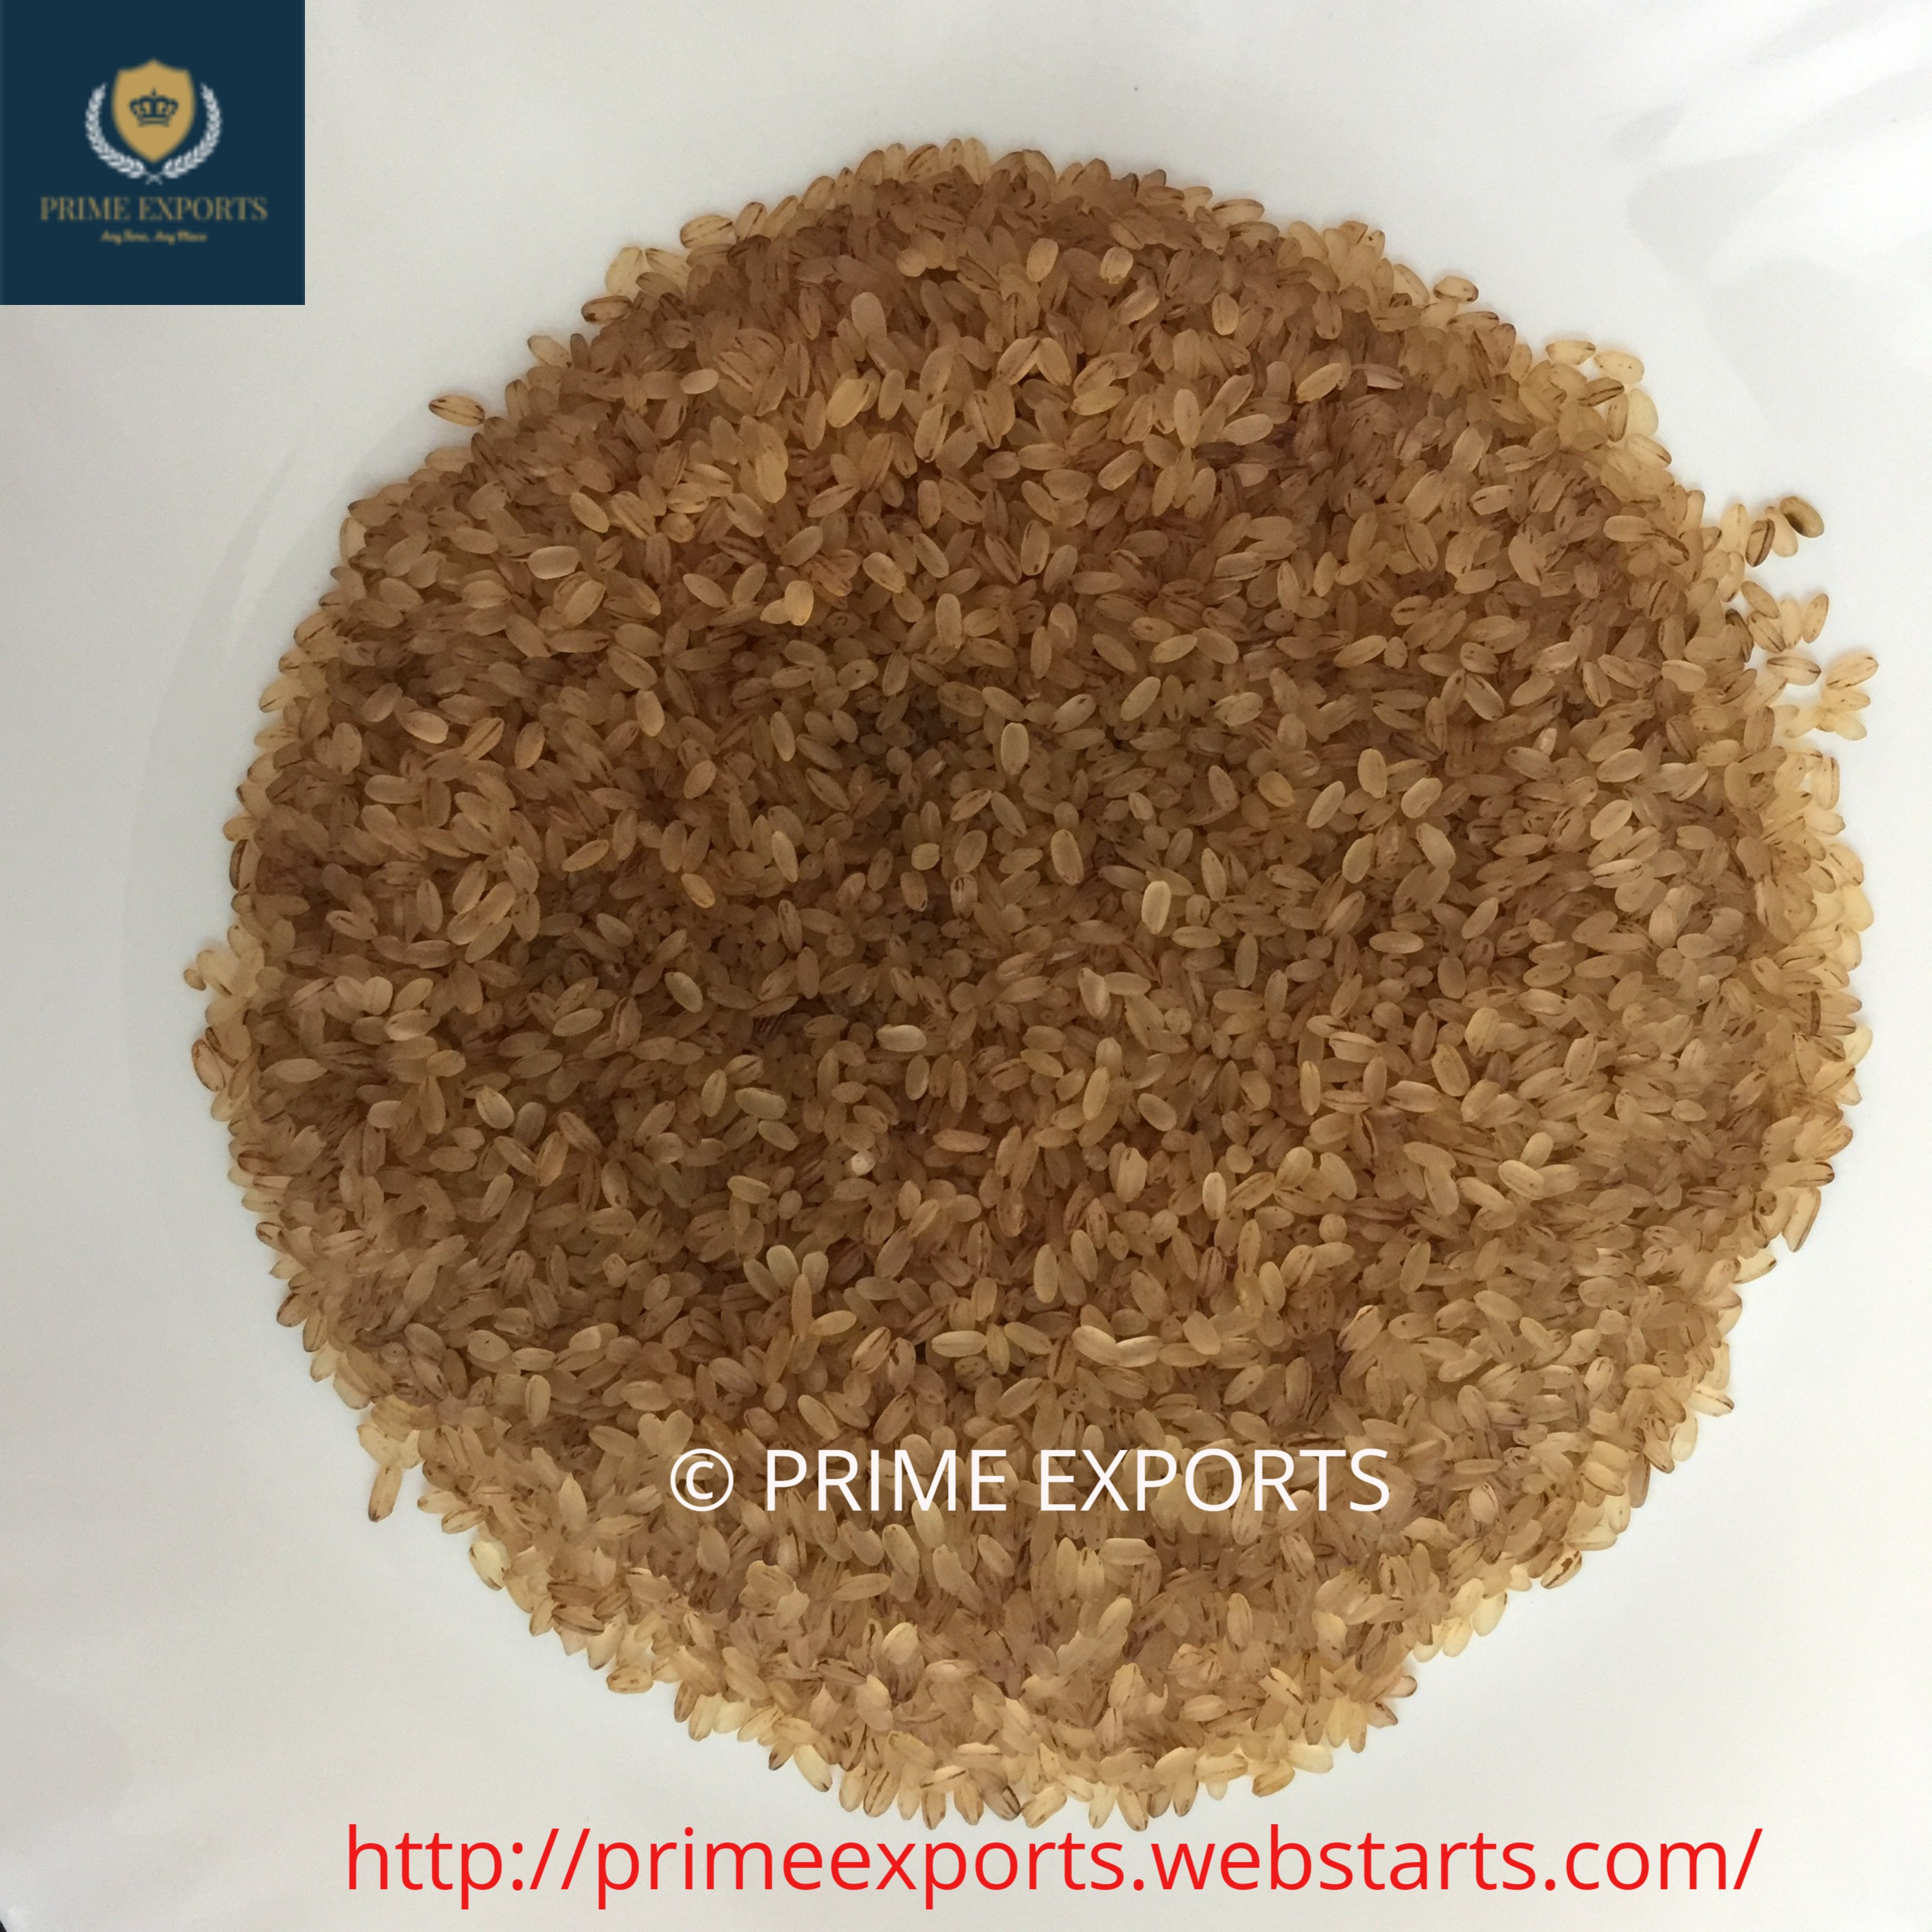 Brown Rice from PRIME EXPORTS'